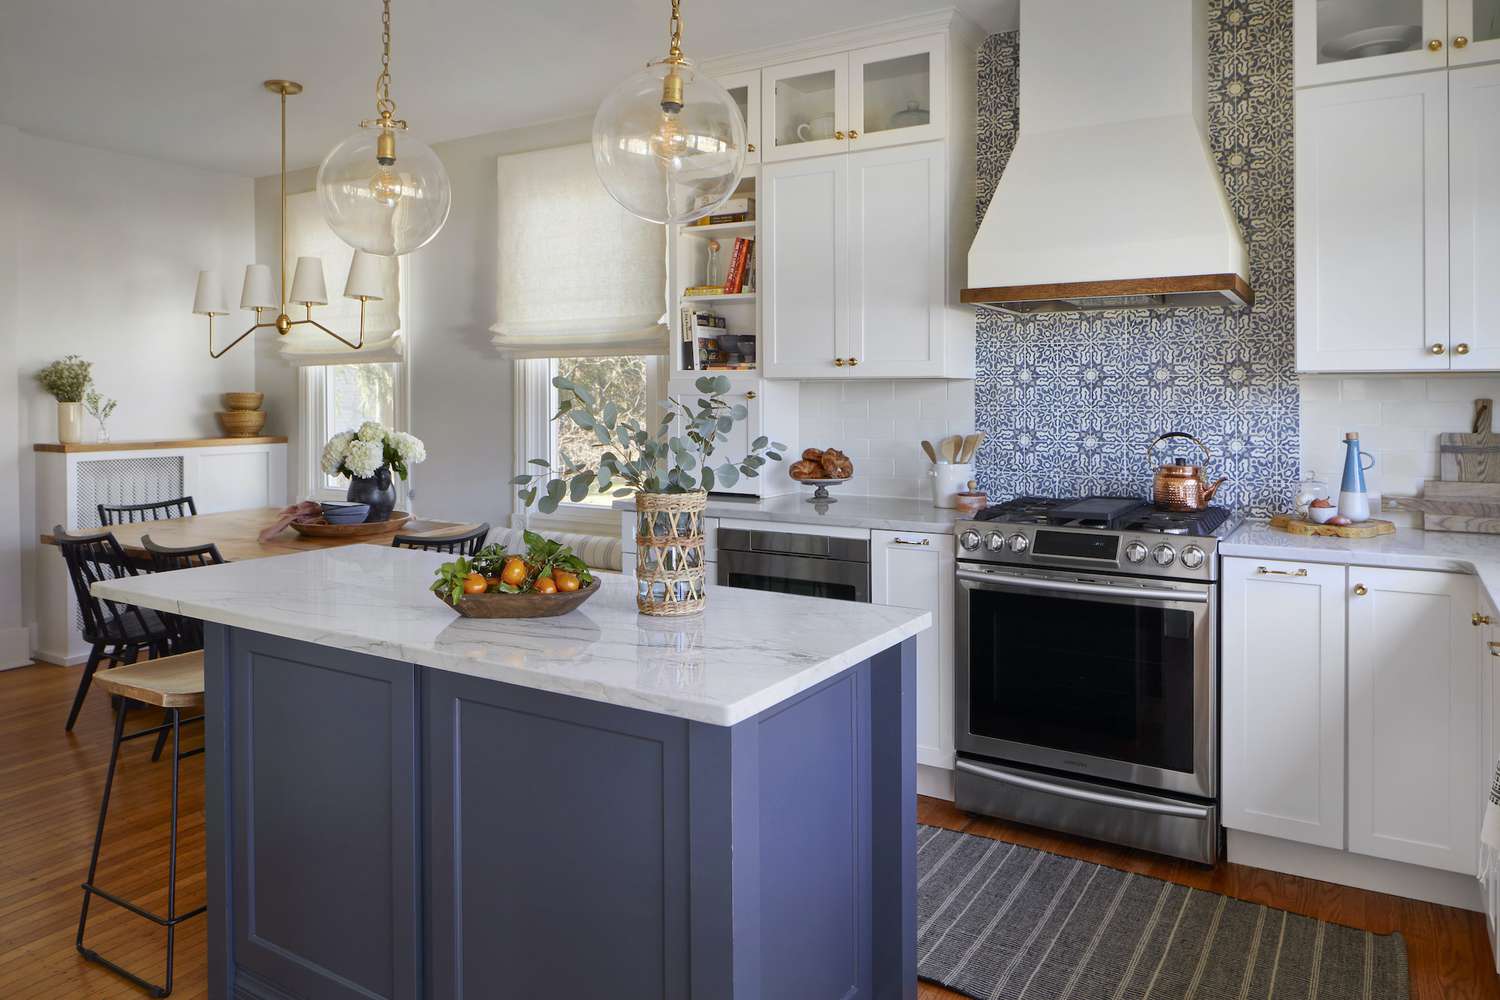 This Beautiful Renovated Kitchen Is the Result of One Couple's ...